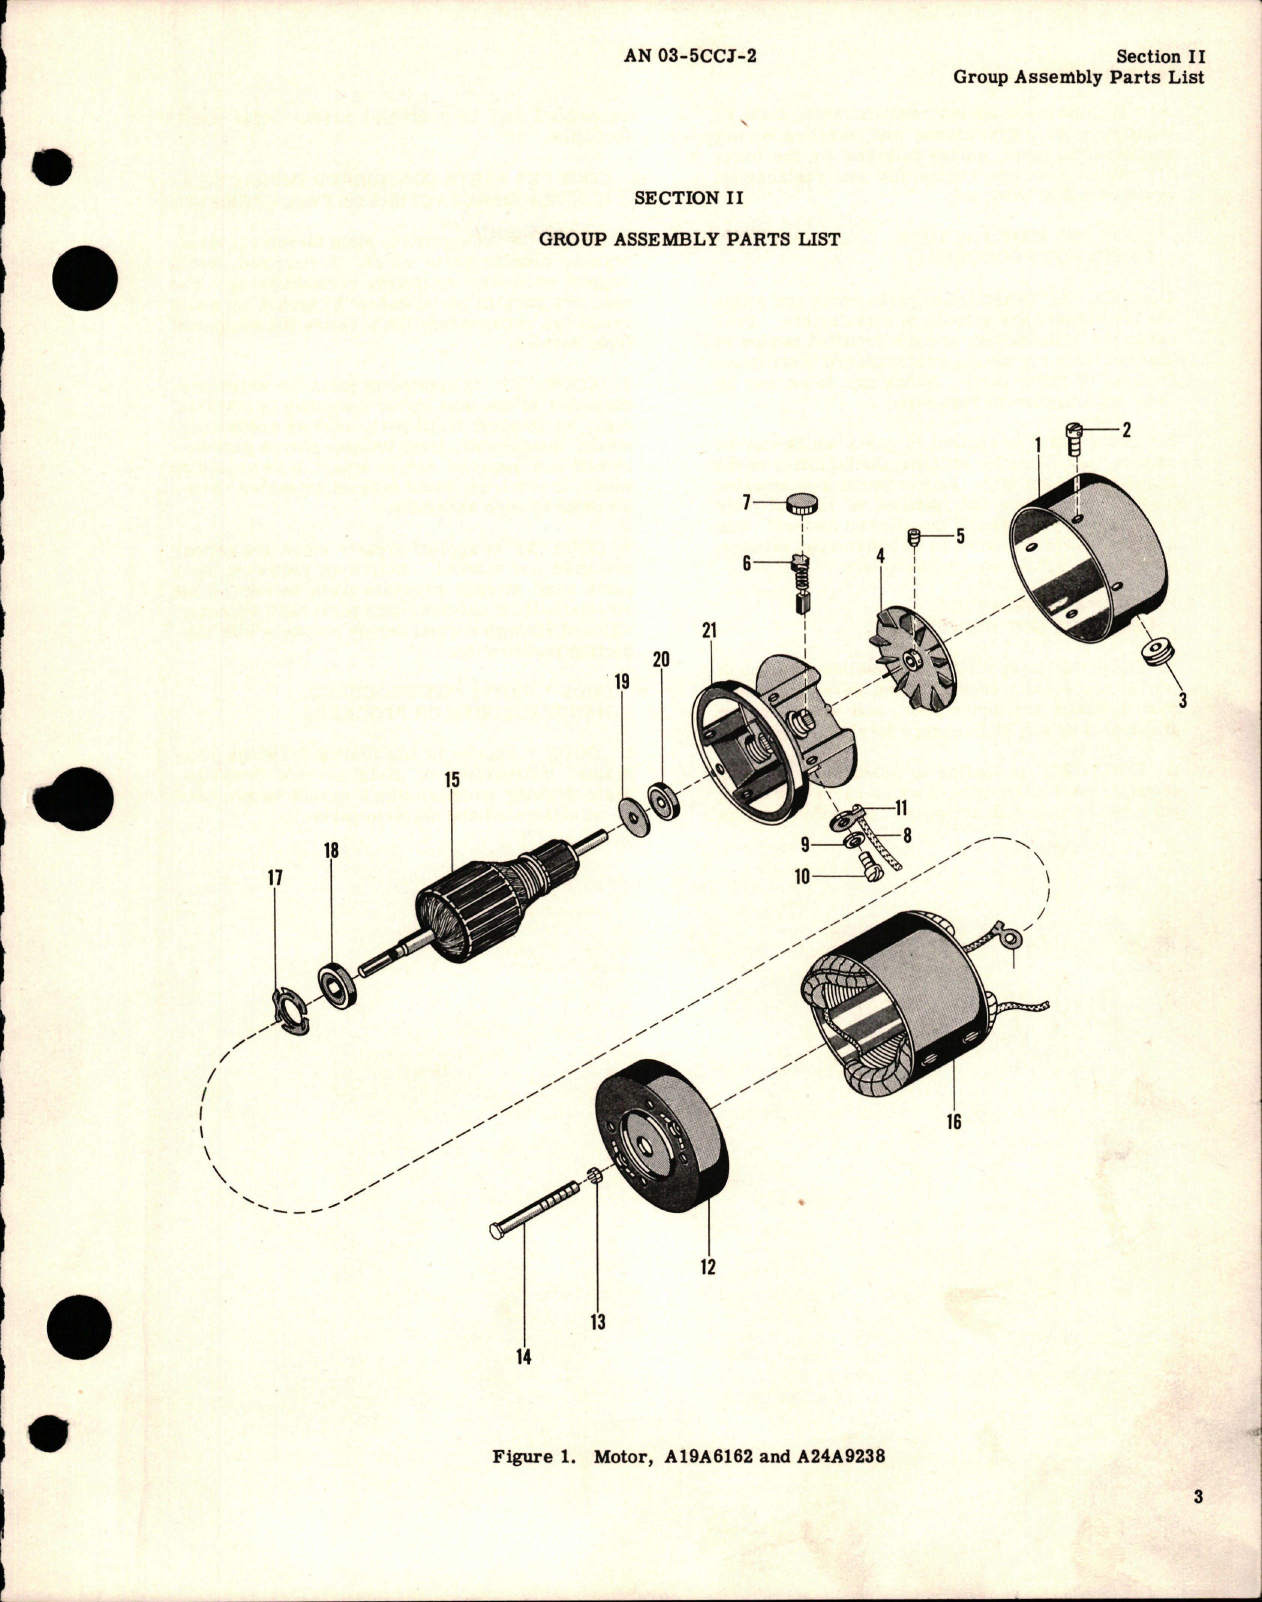 Sample page 5 from AirCorps Library document: Illustrated Parts Breakdown for D-C Motors 